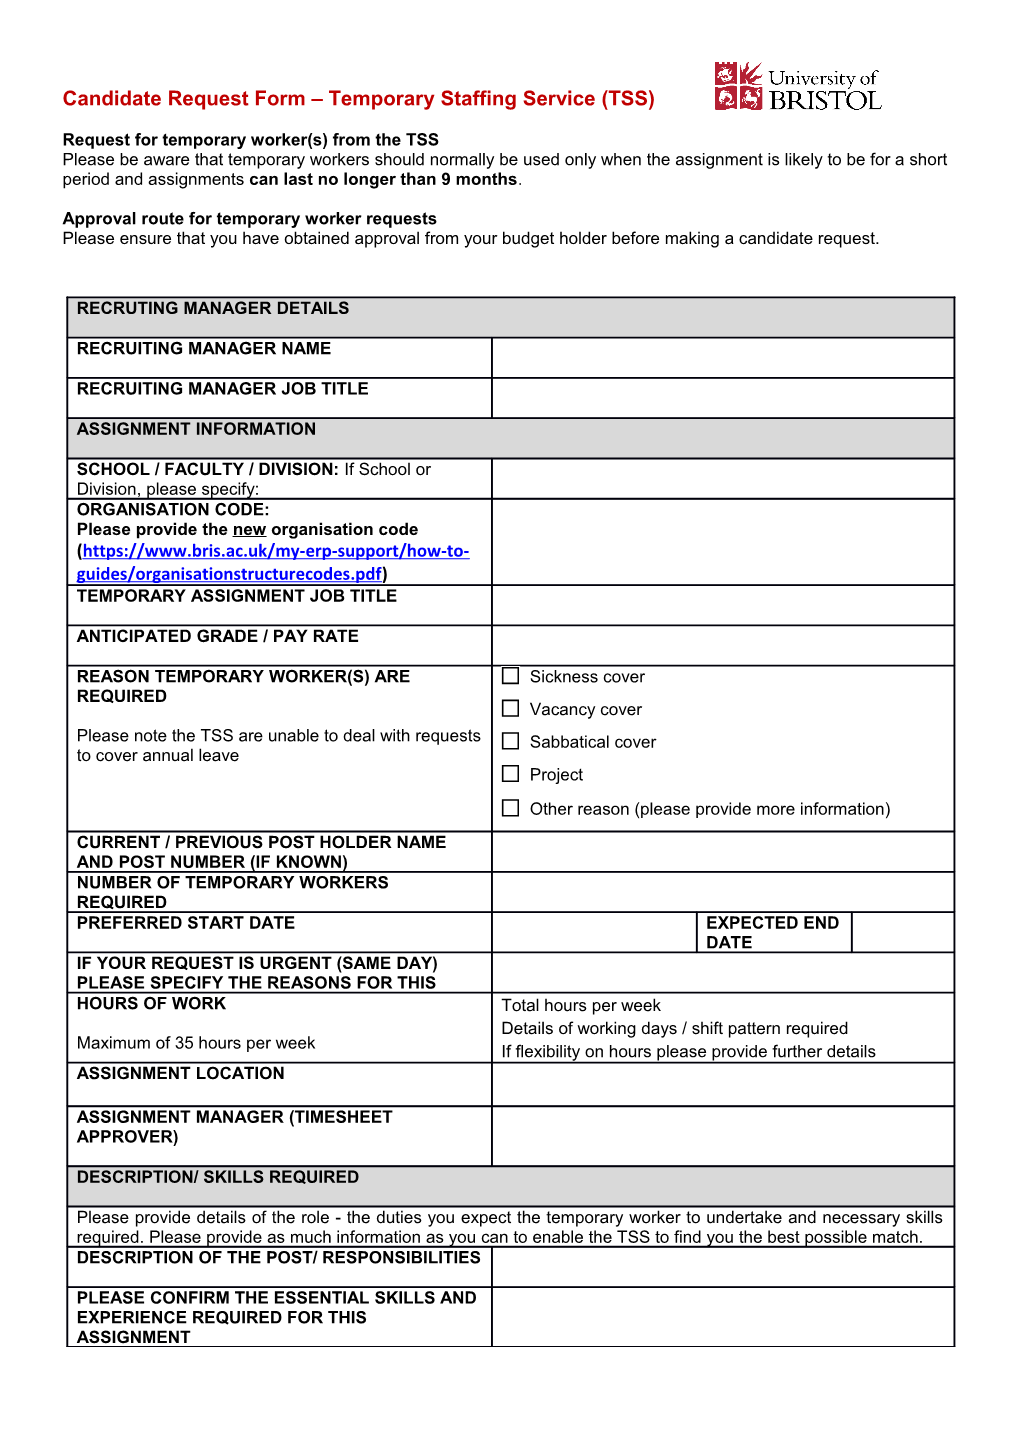 Candidate Request Form Temporary Staffing Service (TSS)